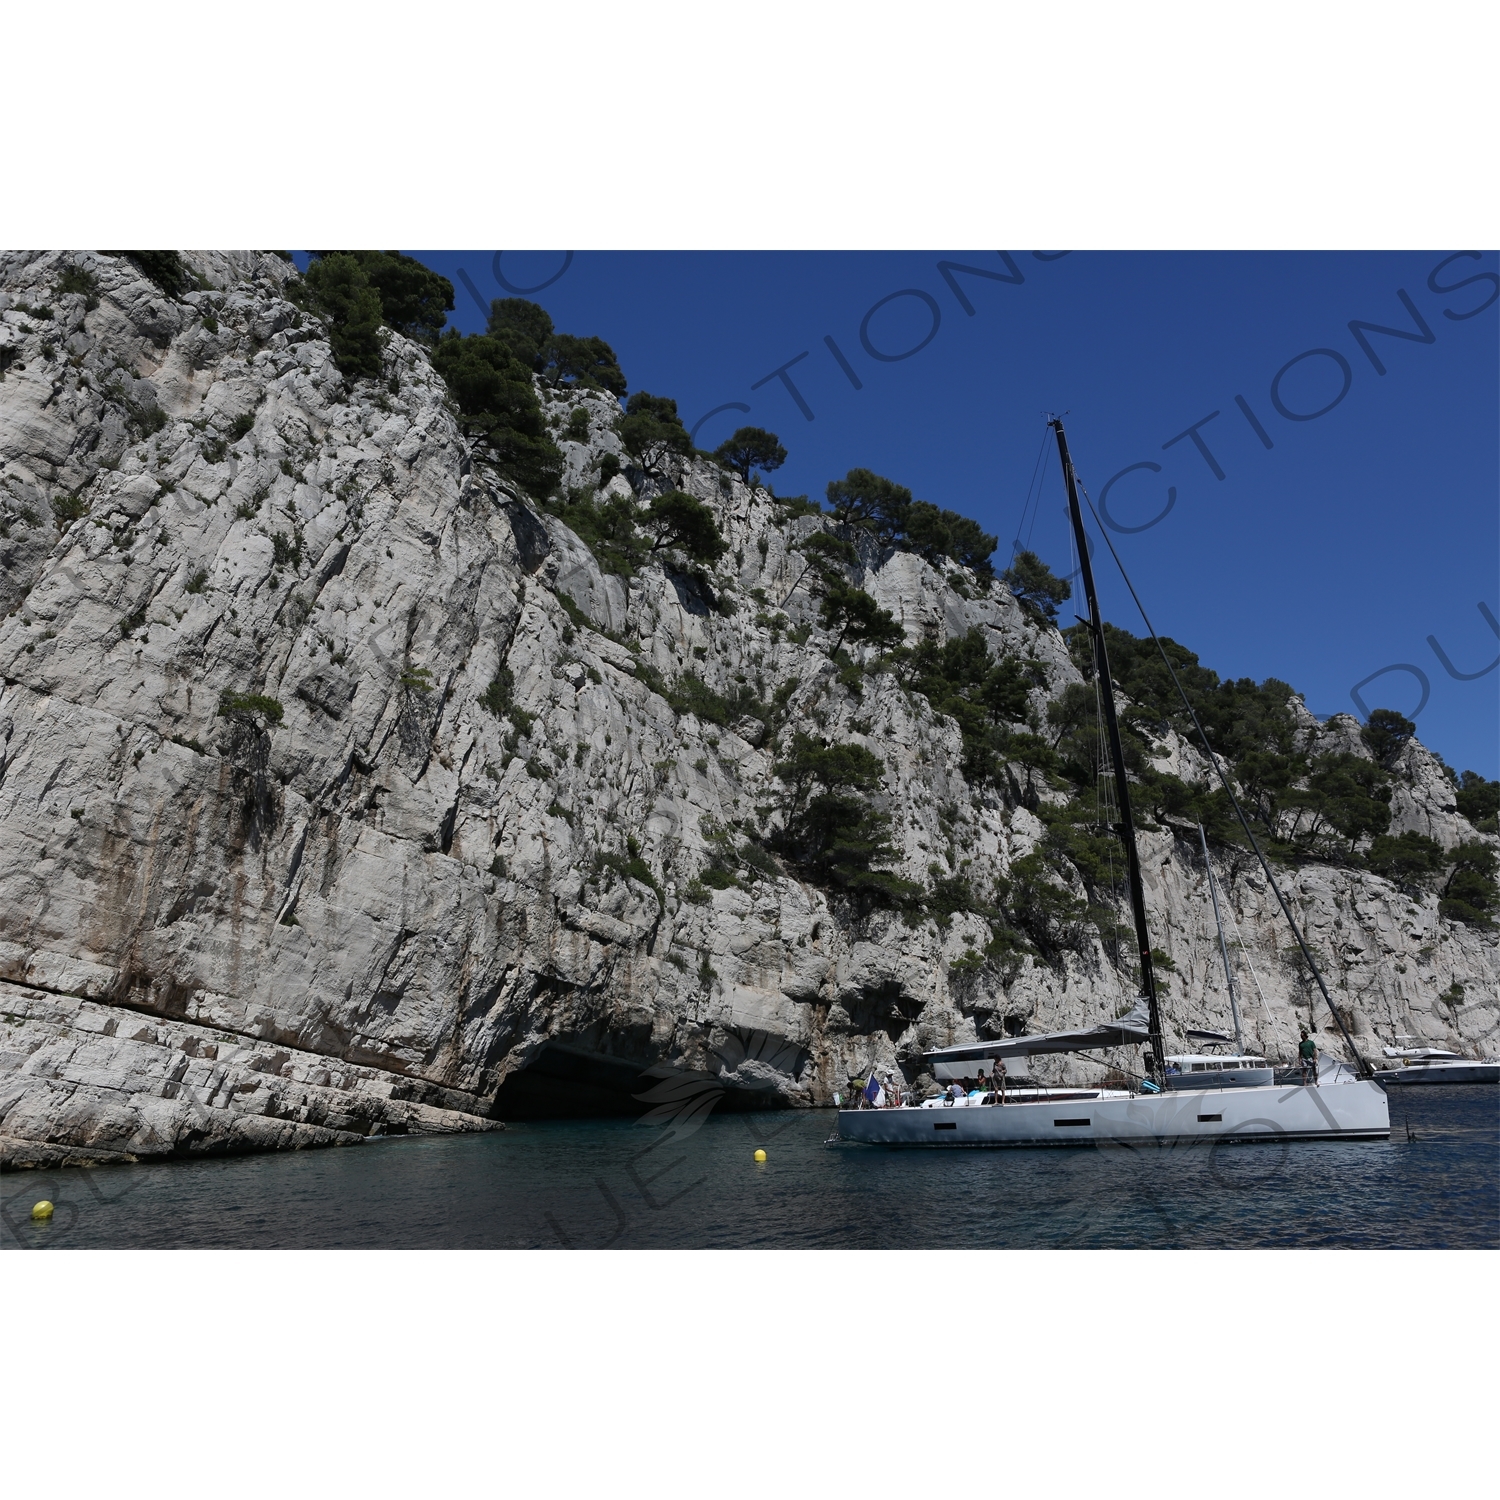 Boat Anchored in a Calanque near Cassis